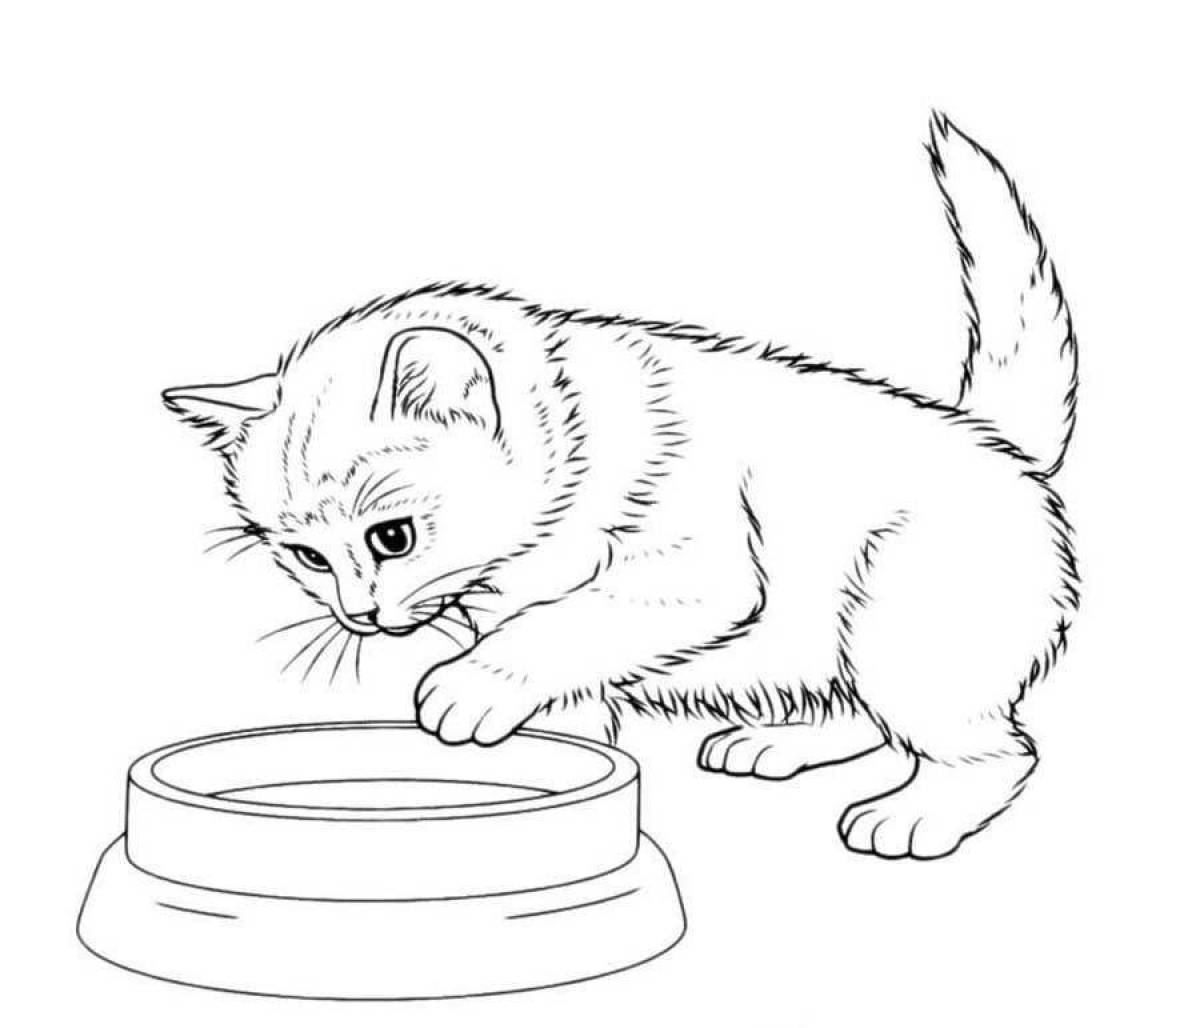 Friendly cat coloring page